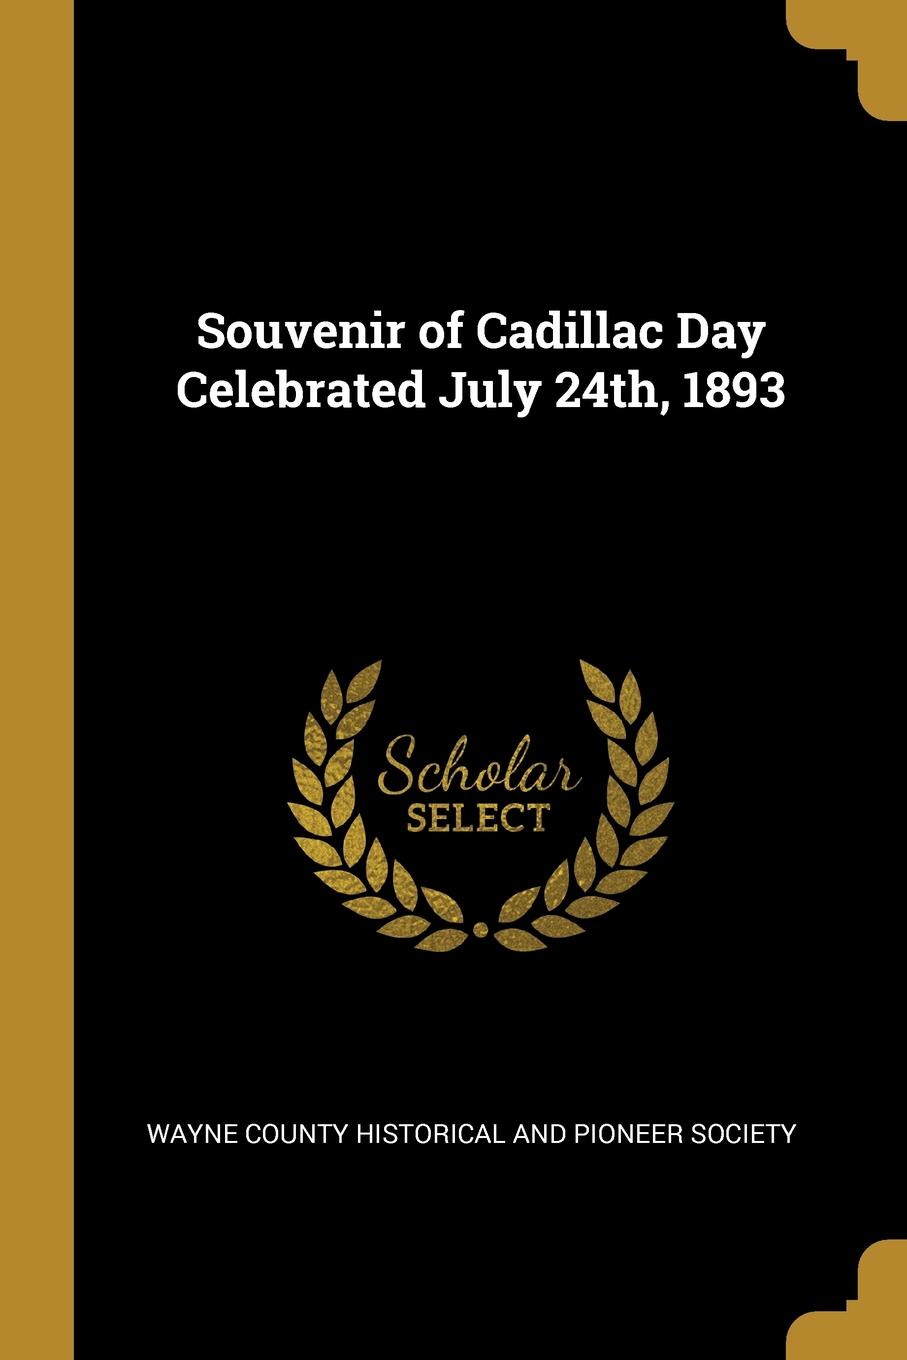 Souvenir of Cadillac Day Celebrated July 24th, 1893